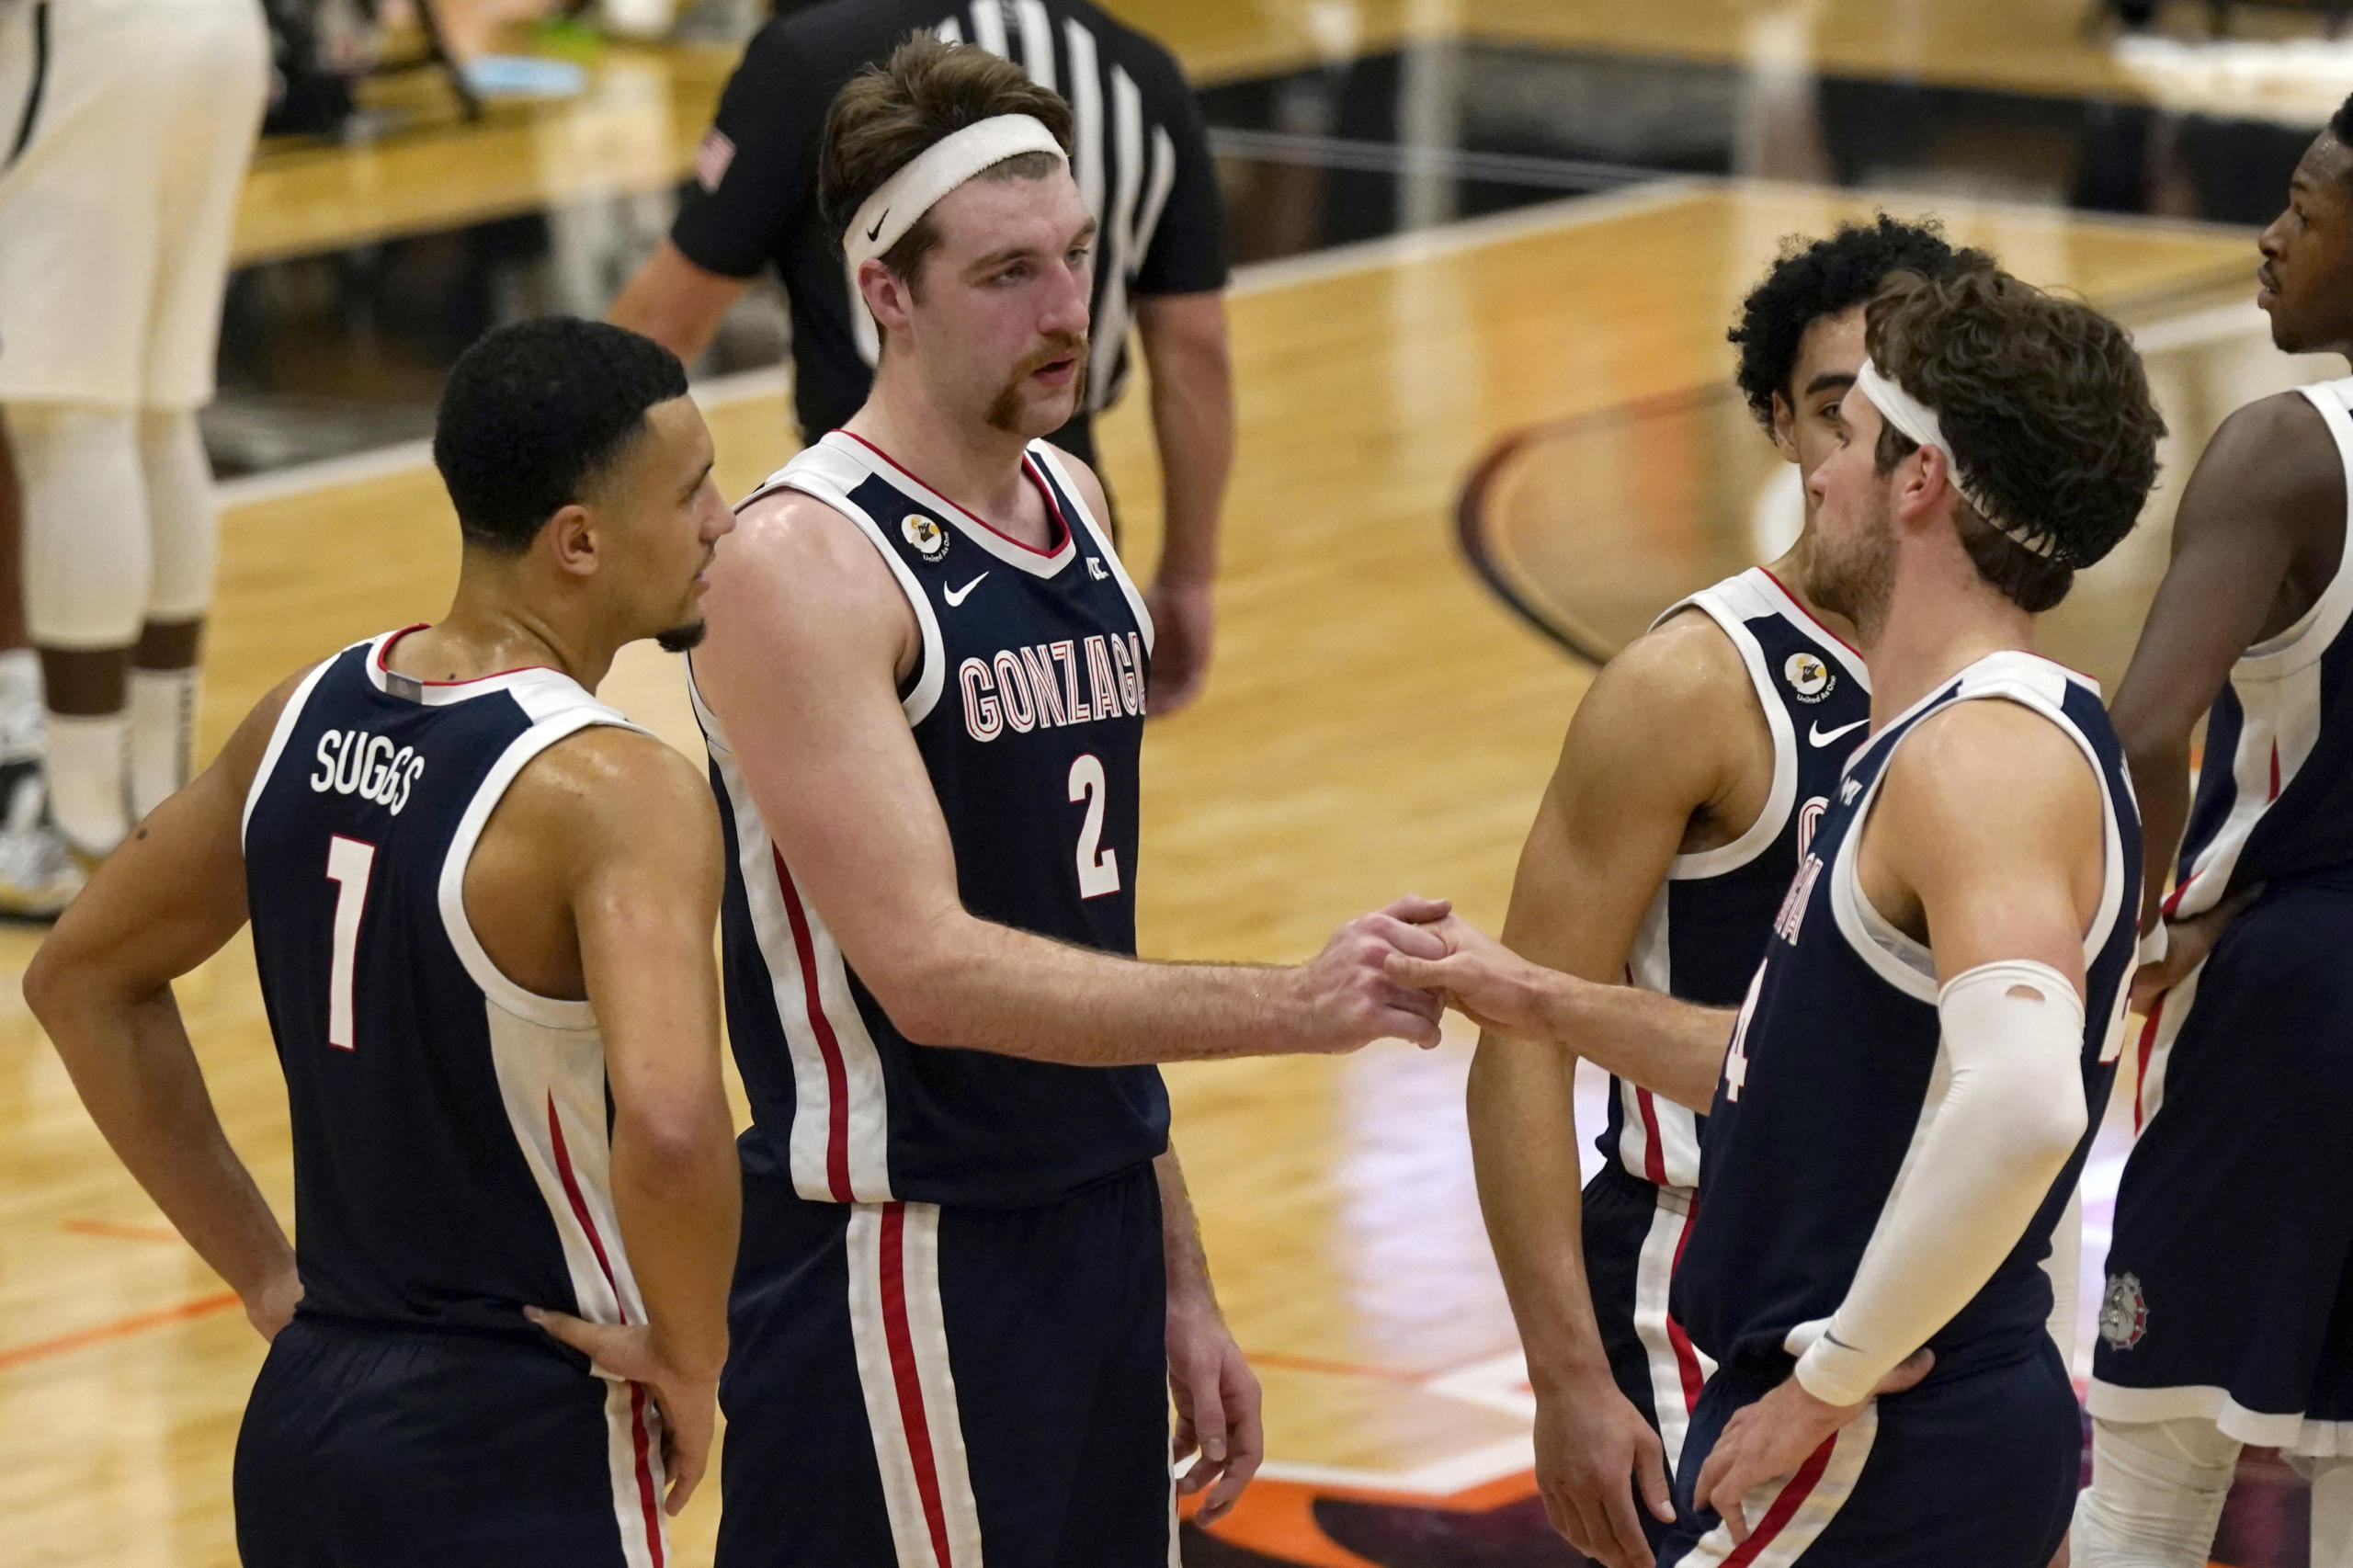 Drew Timme (2) scored 28 points and grabbed 10 rebounds in Gonzaga's 100-61 win at San Francisco on Saturday, Feb. 13, 2021.